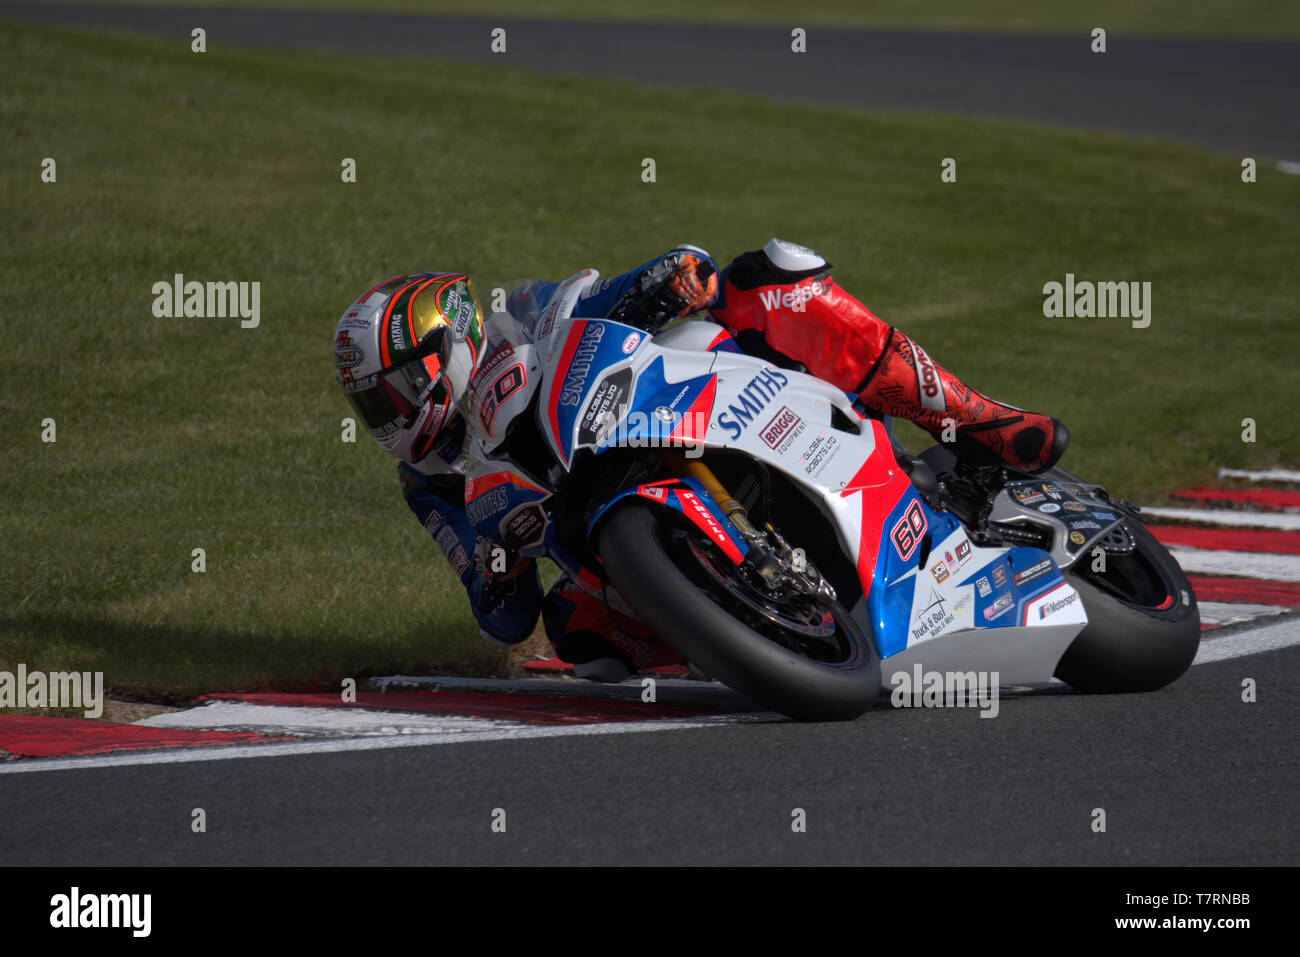 2018 TT winner Peter Hickman riding at Oulton park in the 2019 British superbike championship Stock Photo